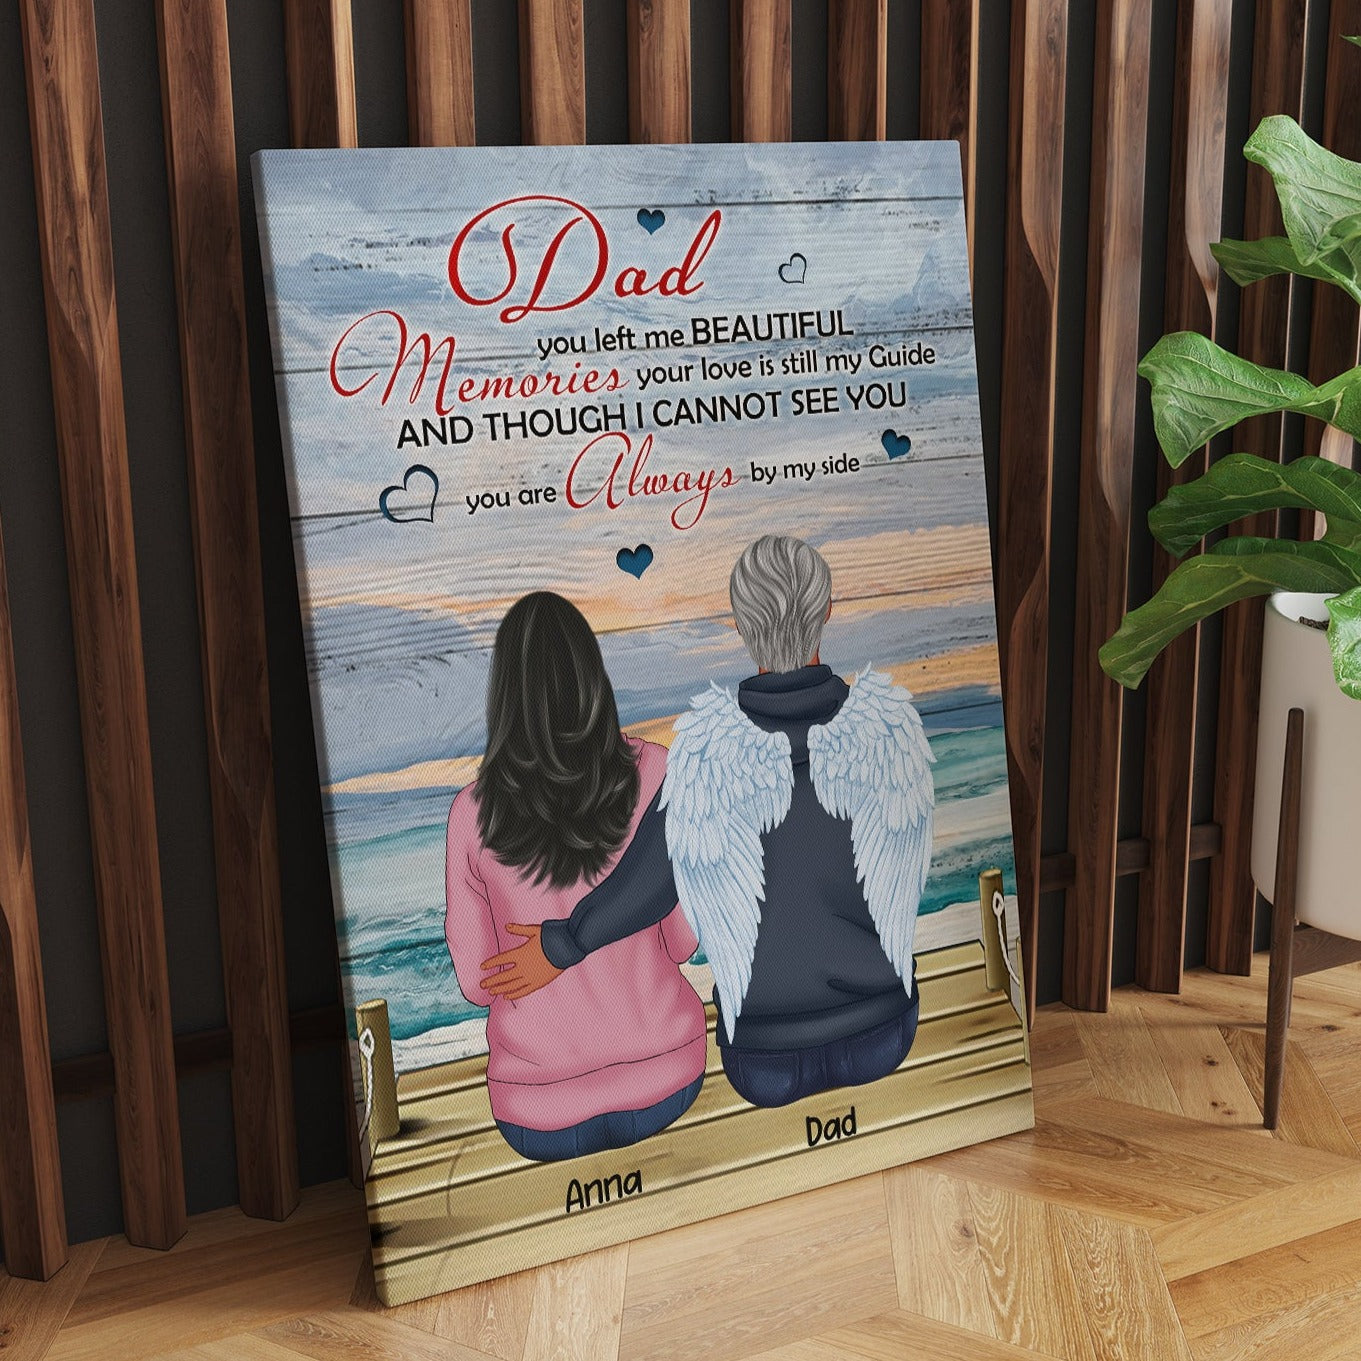 my jokes are officially dad jokes, New Father Cute Vintage - Beautiful  Premium Quality Gift Idea , New Mommy , Gift, Expecting dad Gift, daddy Gift ,gift idea for father's day,birthday,grandpa,